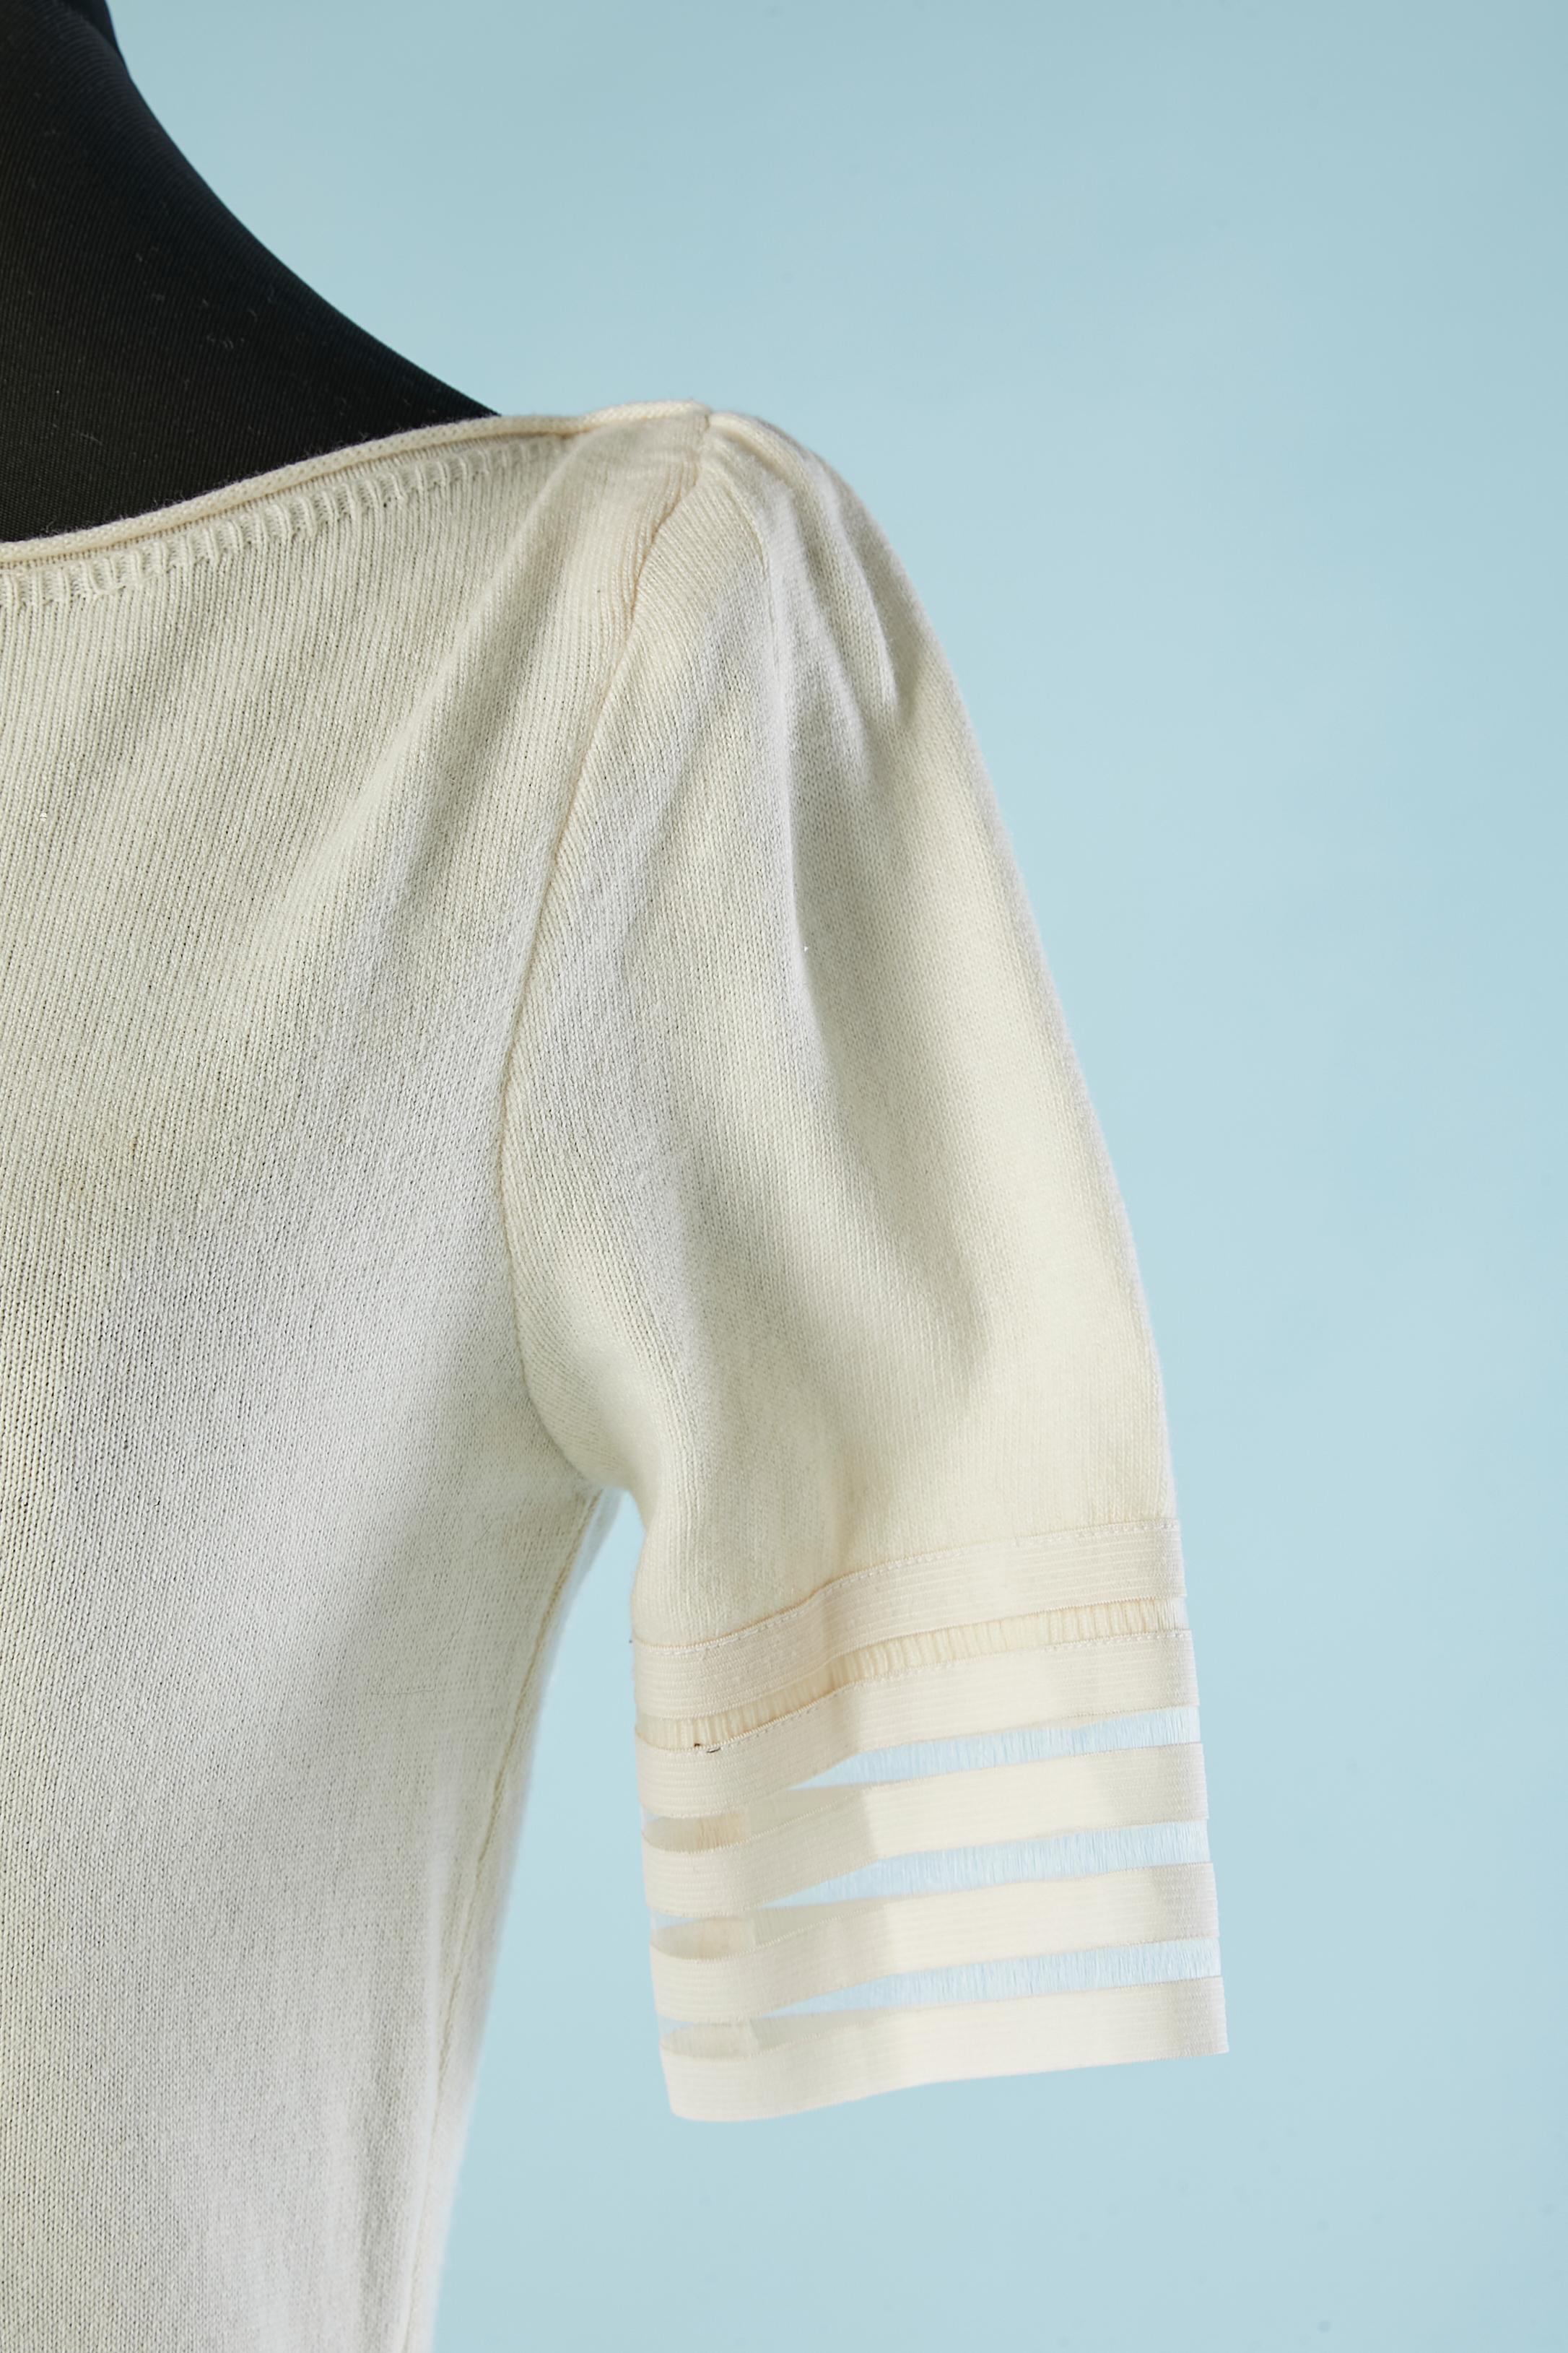 Off-white wool & cashmere tee-shirt. Knit composition: 40% wool, 30% rayon, 20% nylon, 10% cashmere. 
Elastic band and transparent nylon thread on the sleeve edge. 
Thin shoulder-pad. 
SIZE S